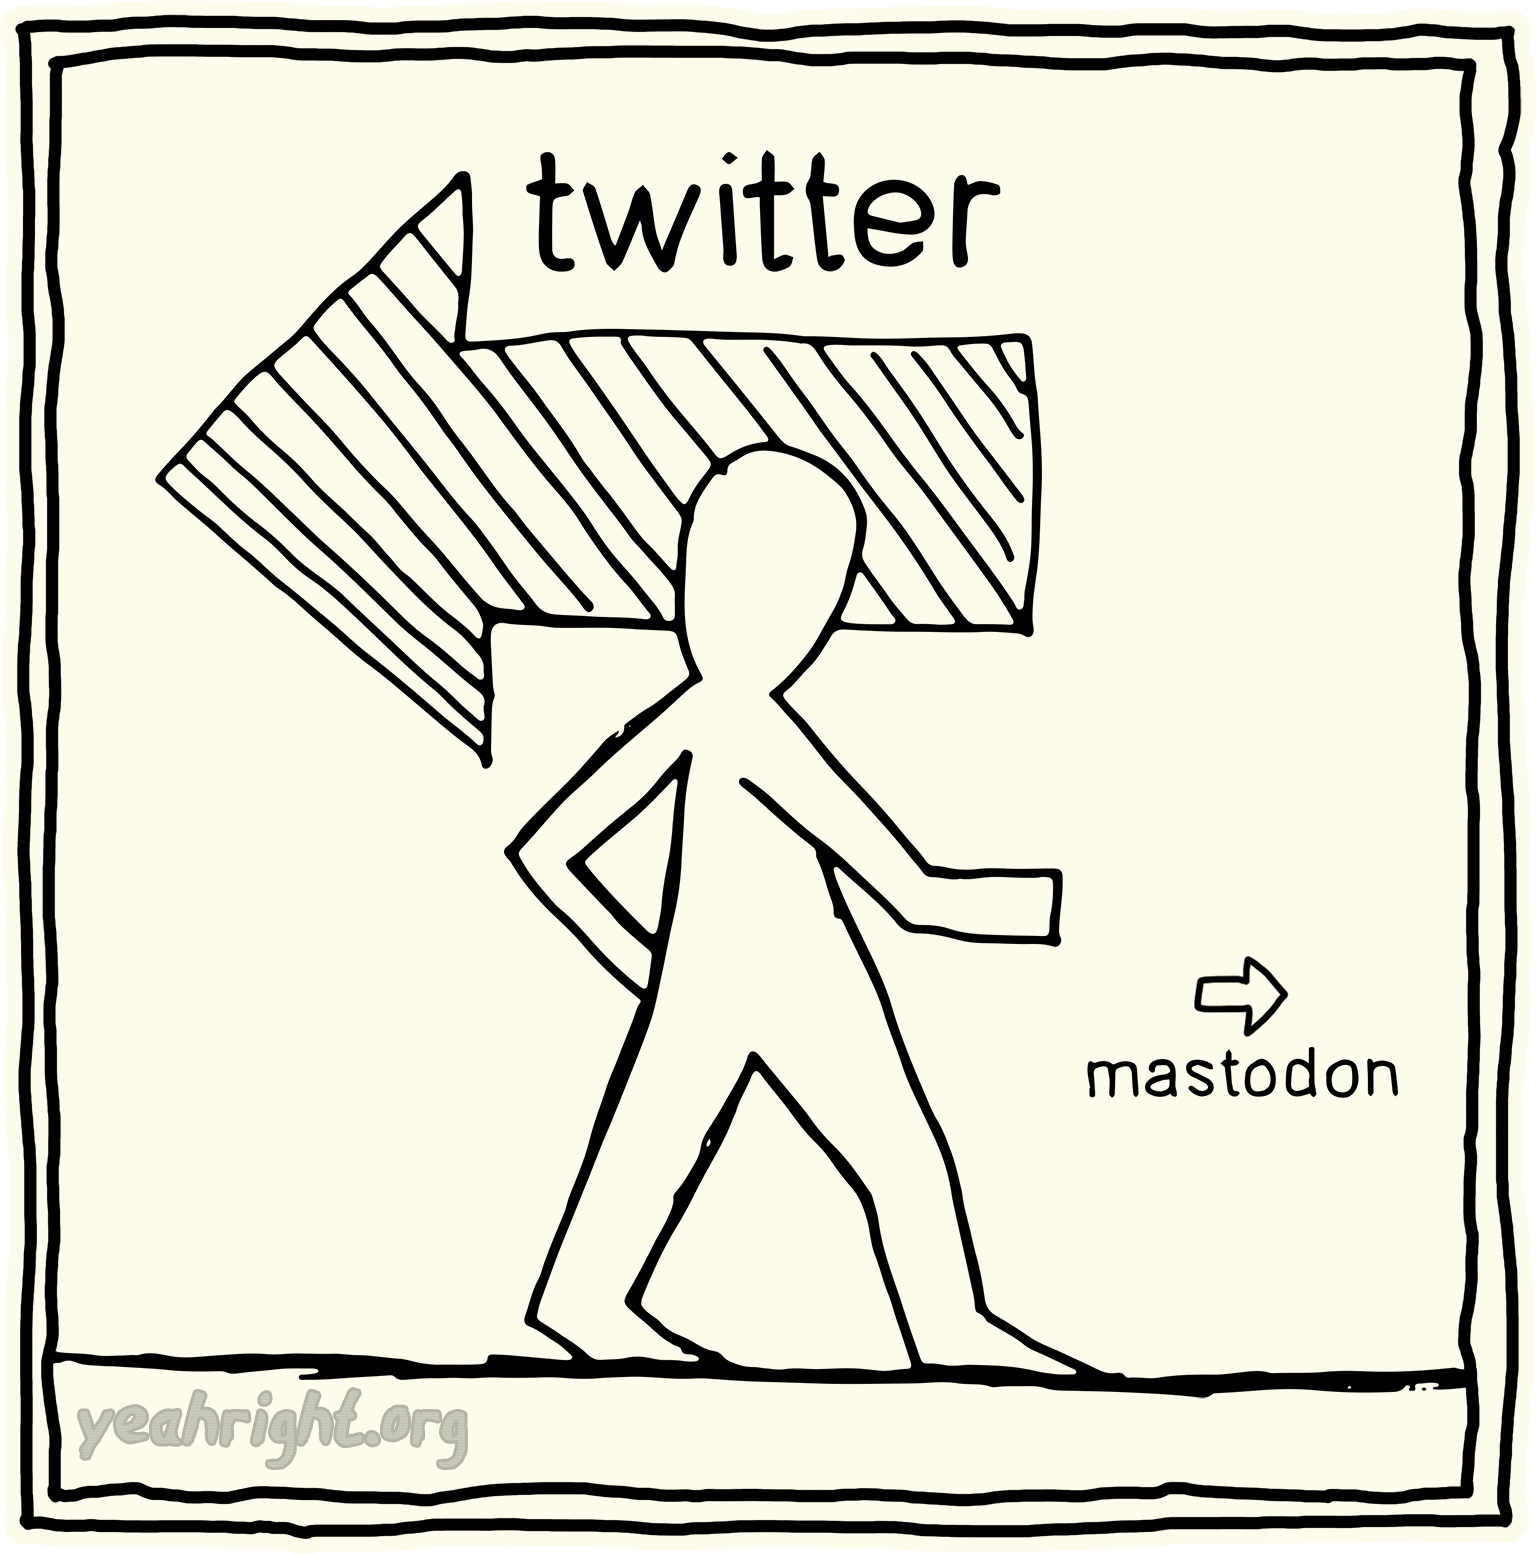 A big arrow pointing to the left, to twitter. A small arrow (and lower to the ground is pointing to the right, to mastodon)
Yeah Right! (the cartoon character) walking self-confident to the right.